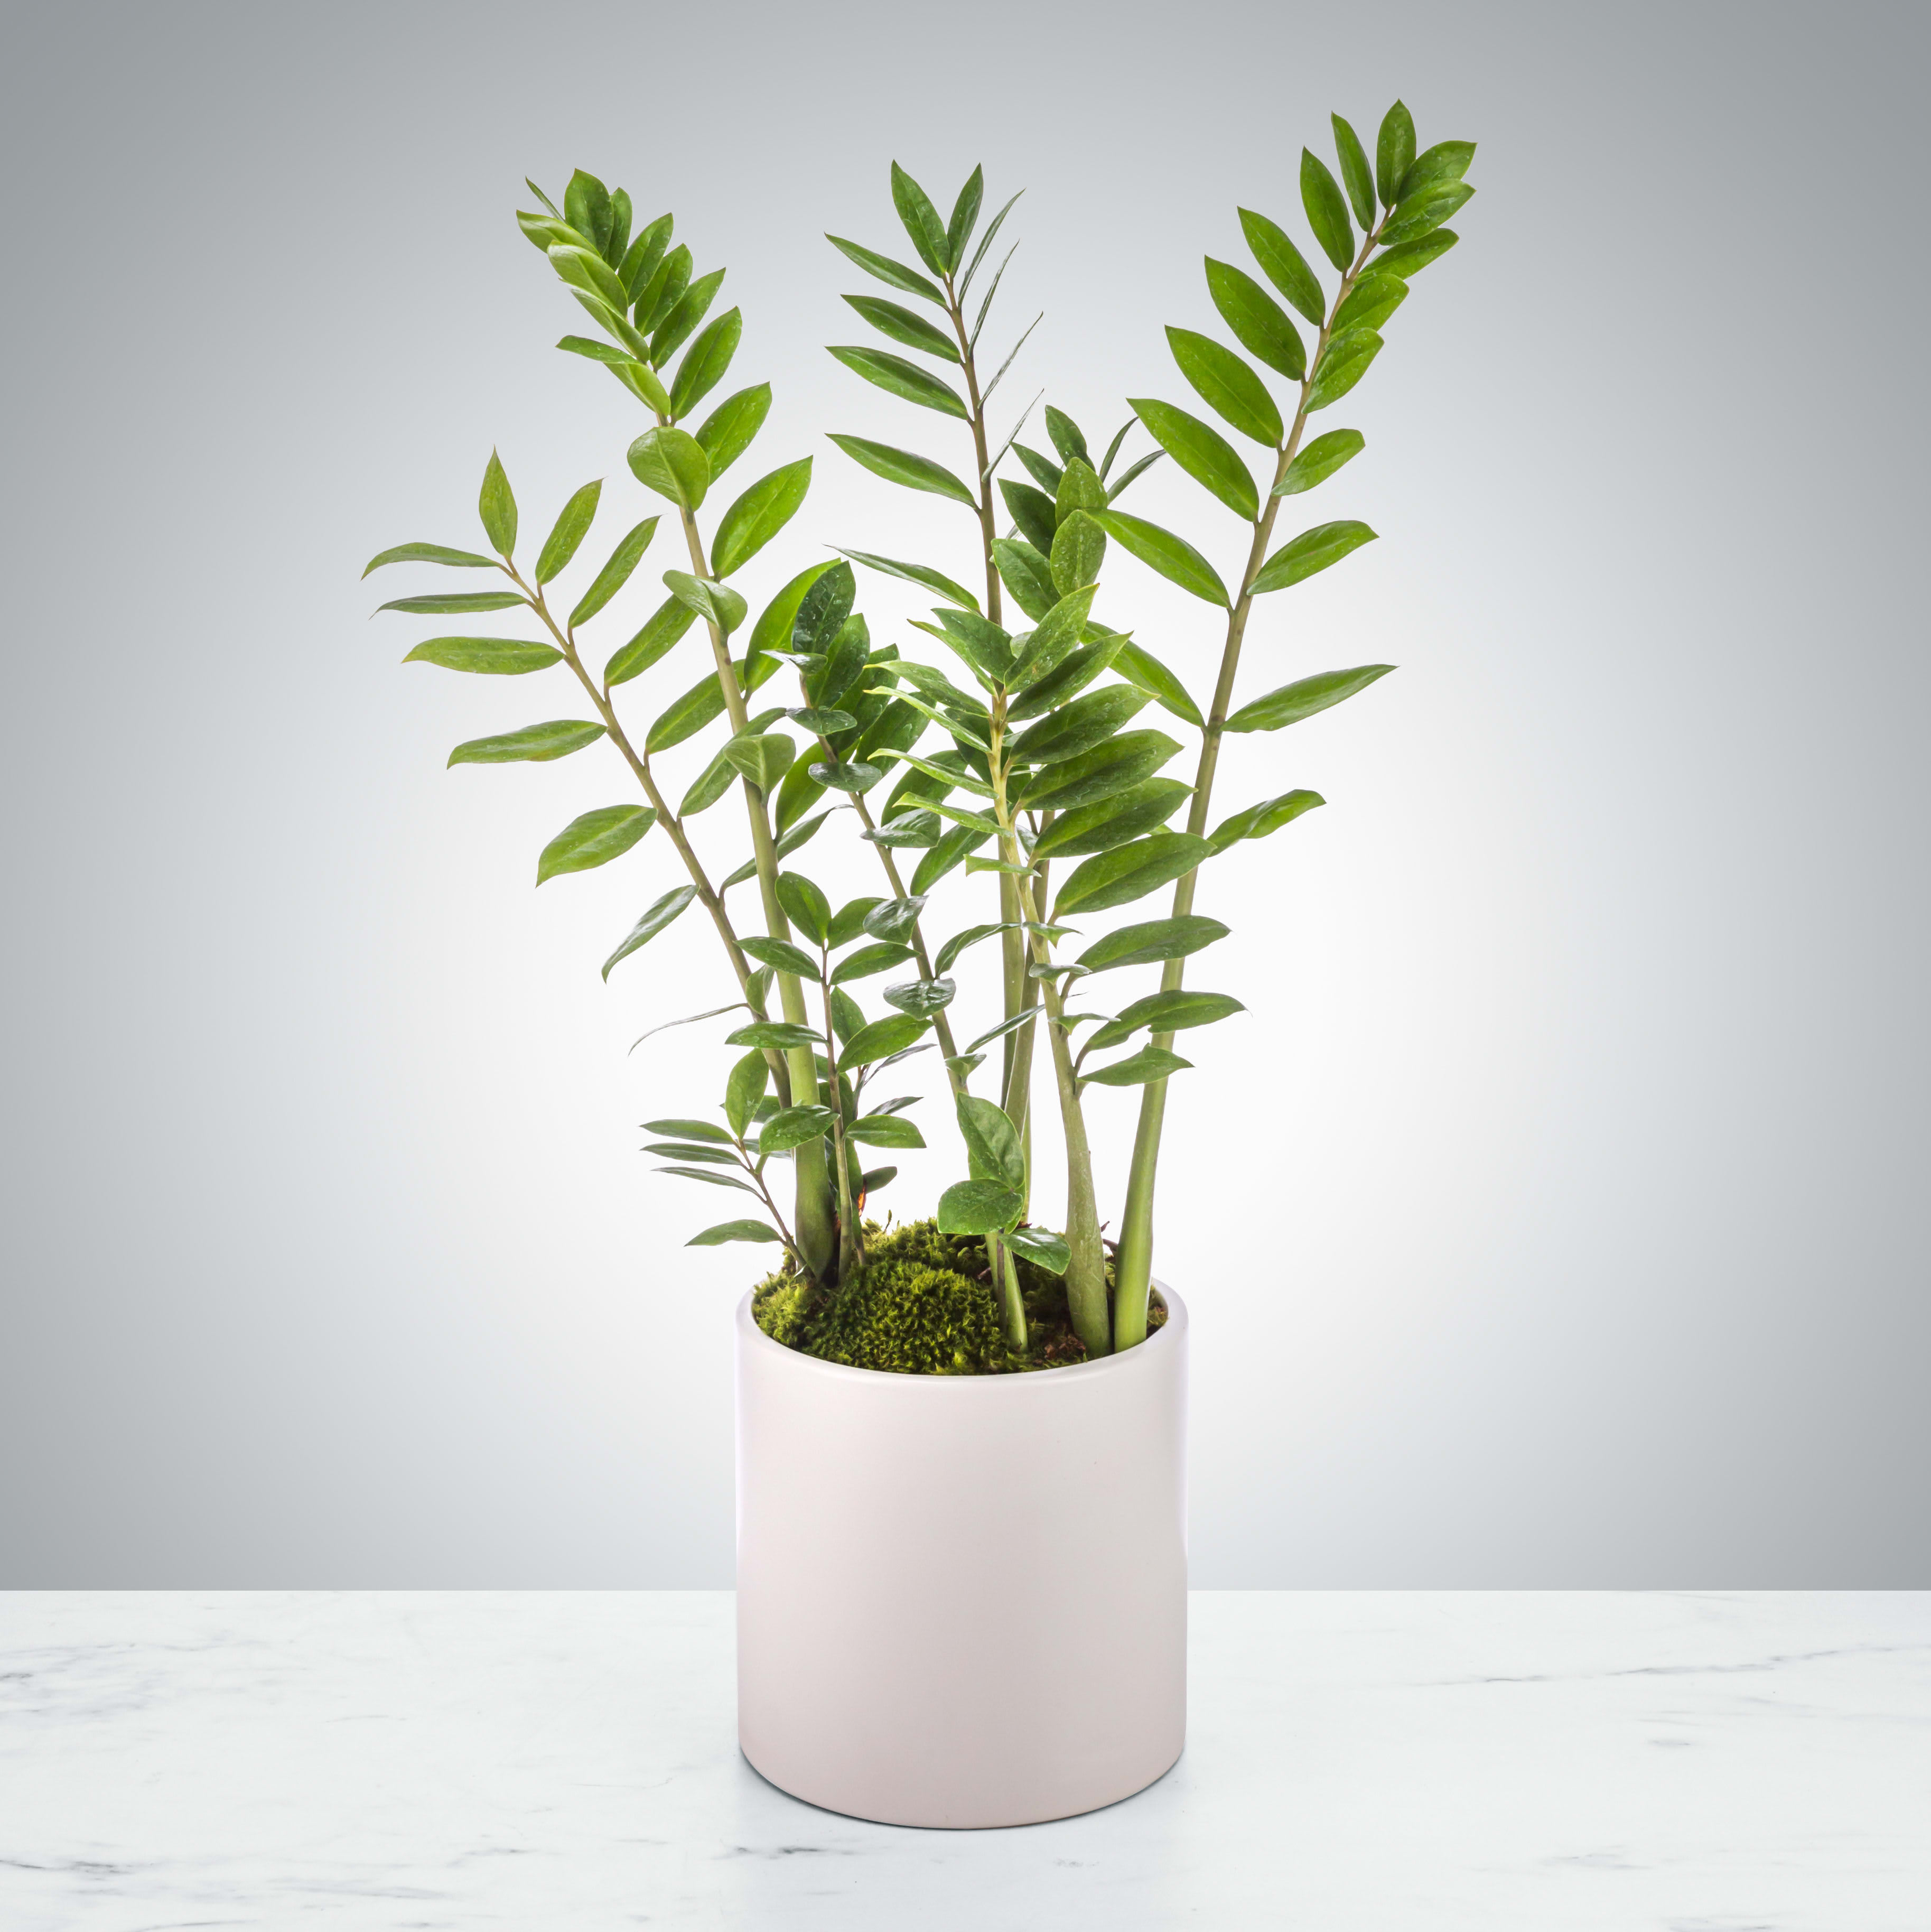 ZZ Plant by BloomNation™ - The ZZ plant is a great plant for somebody who can't keep plants alive! Also known as the zamioculcas zamiifolia, this plant likes indirect light and rare waterings. Leave it on a desk or table and sometimes remember to pour some water in the pot. The perfect housewarming or congratulations gift for your &quot;black thumb&quot; friends and family.